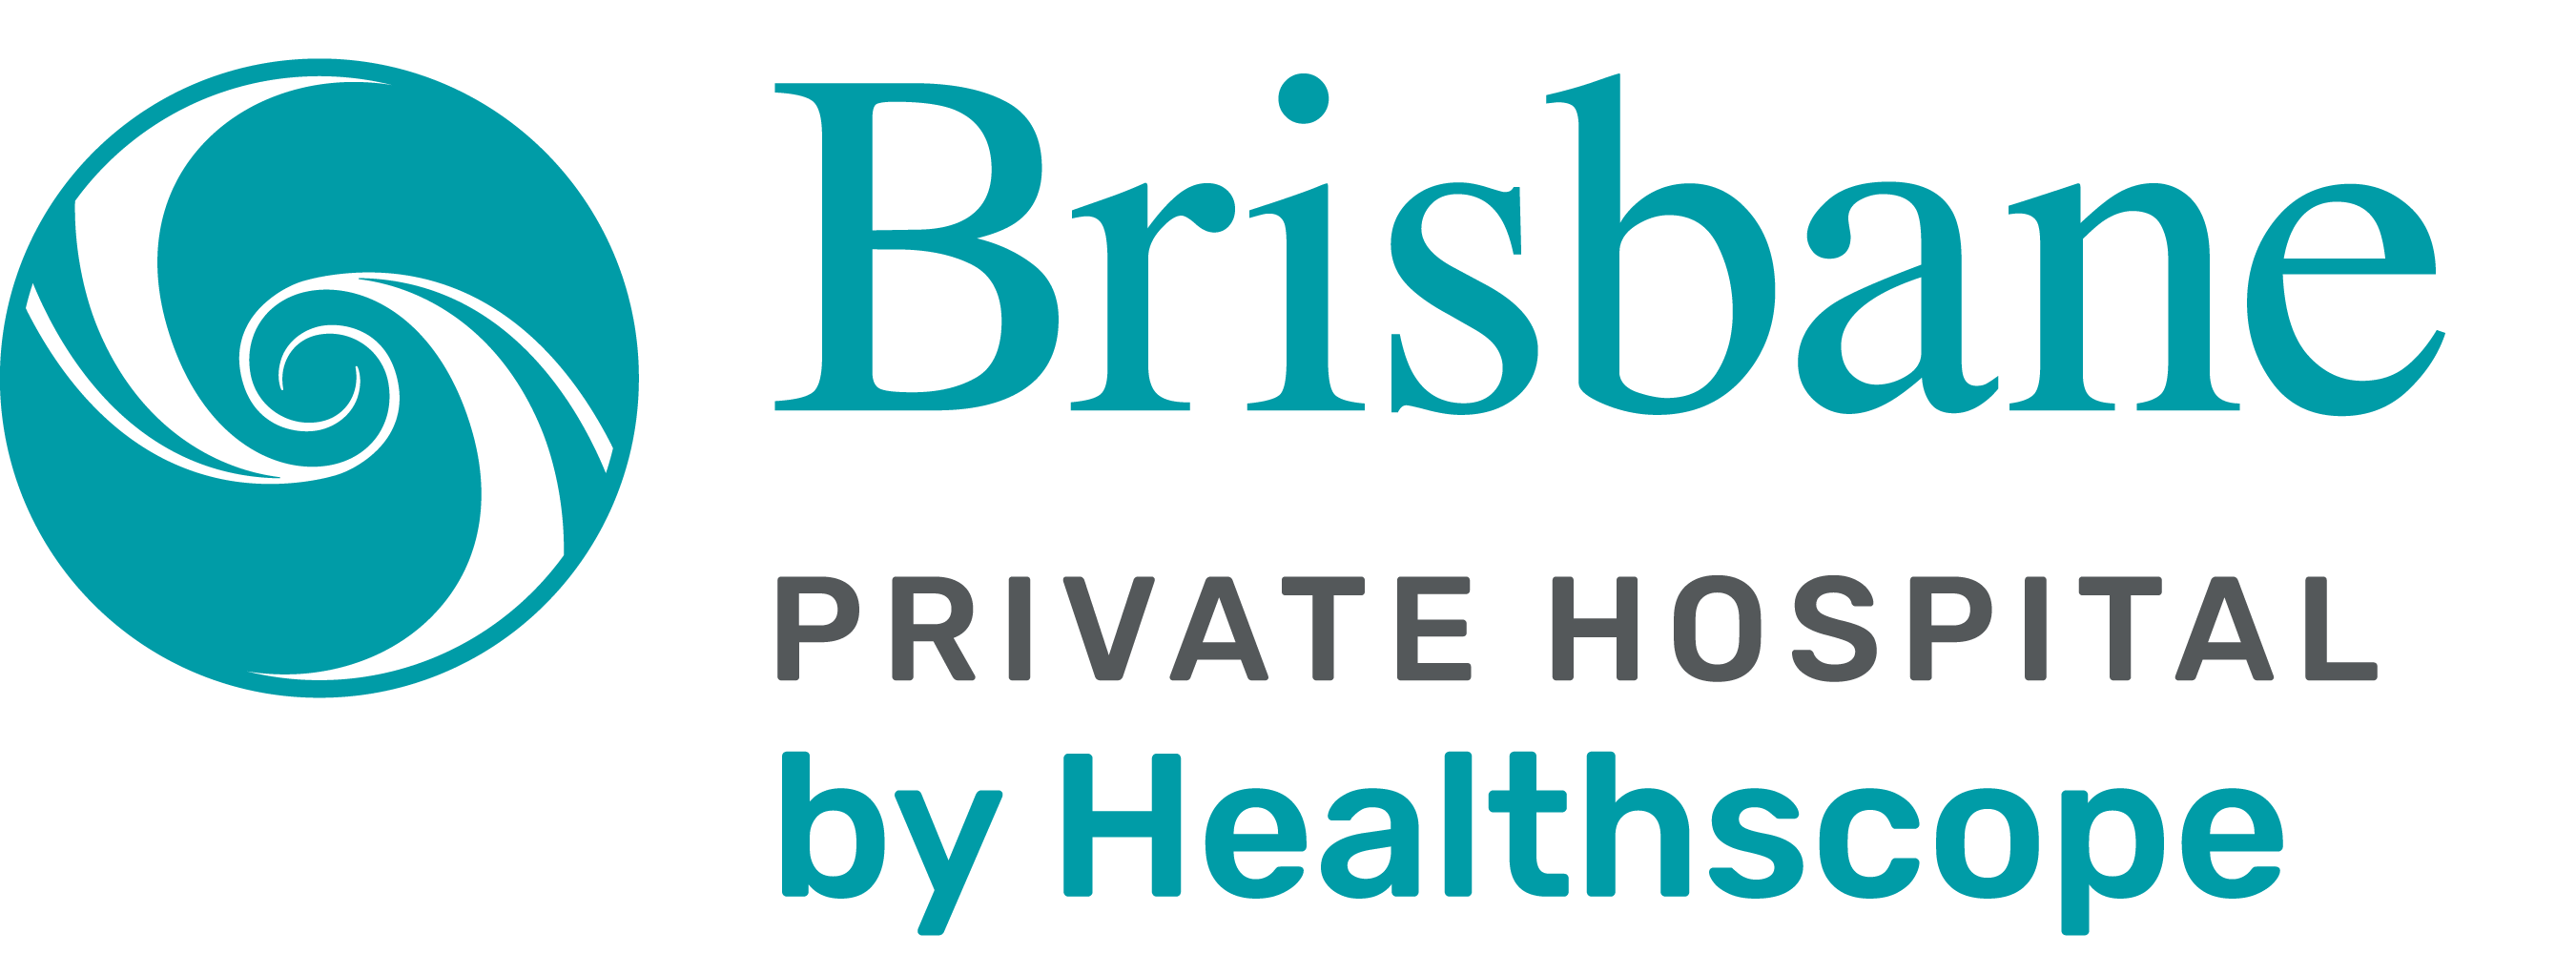 Brisbane Private Hospital by Healthscope